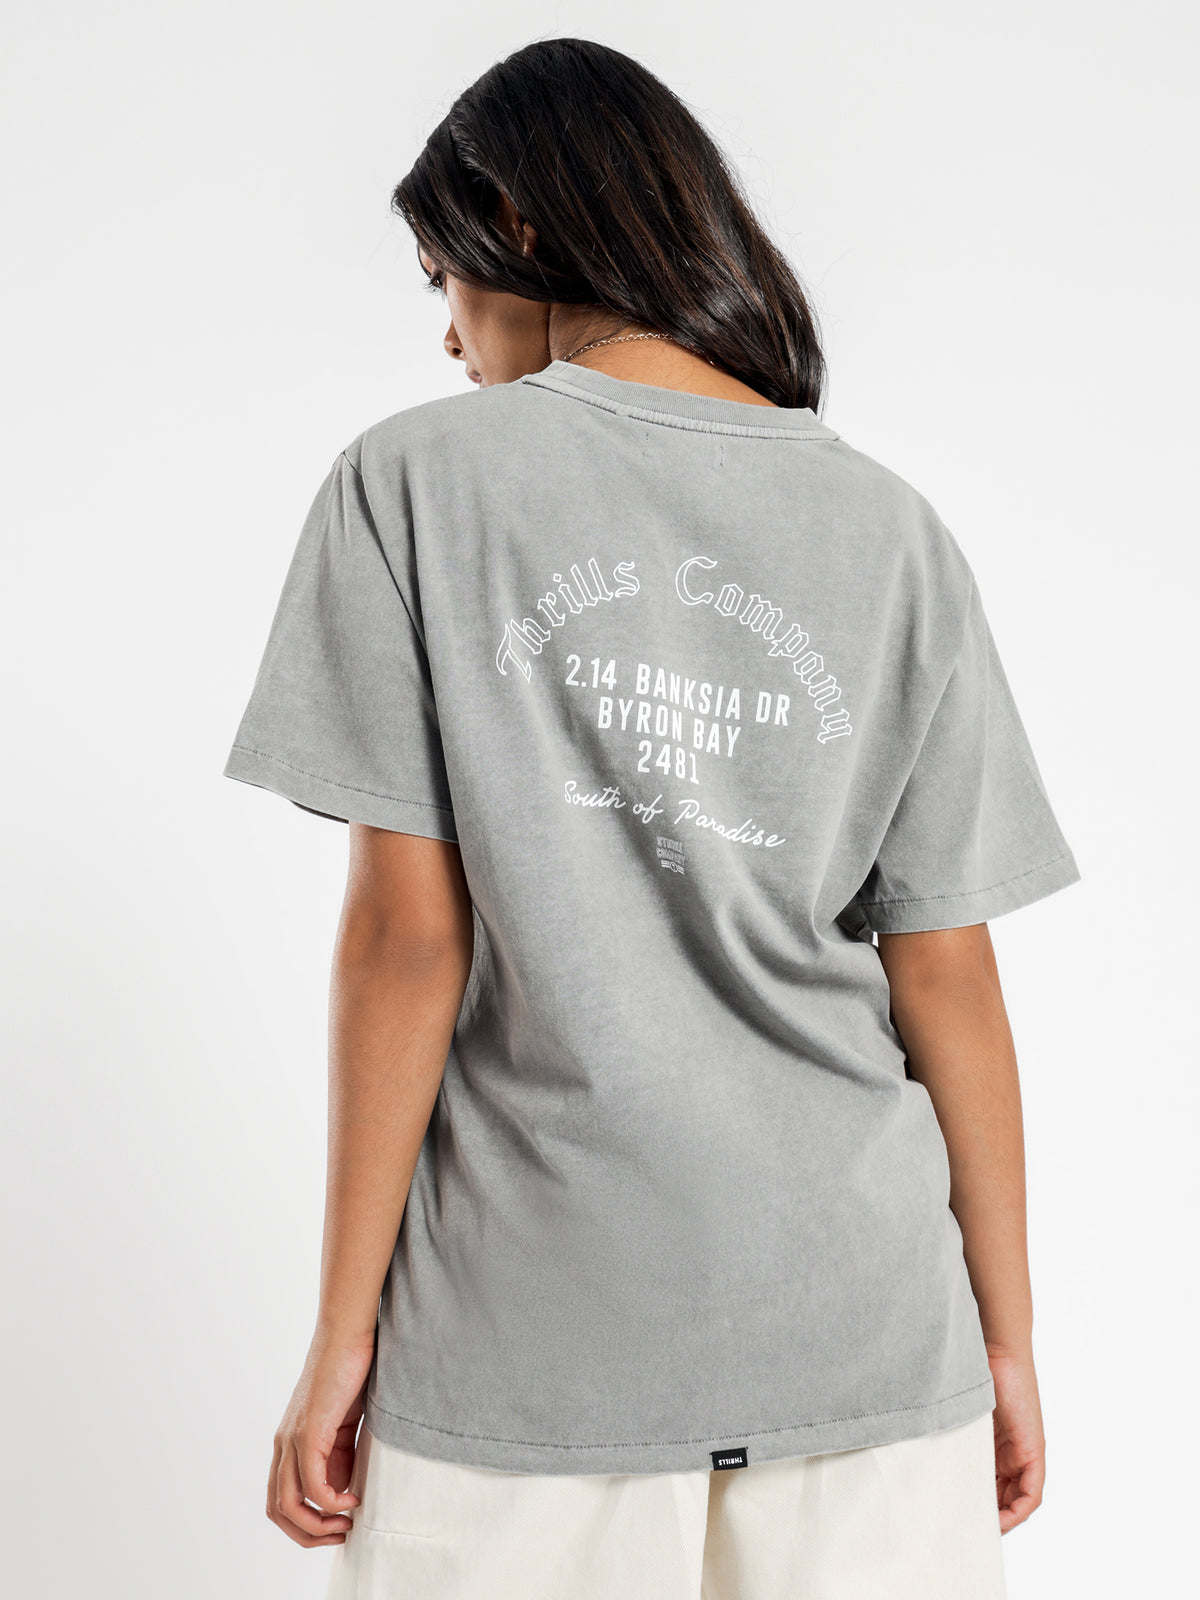 Rattling Merch T-Shirt in Washed Grey